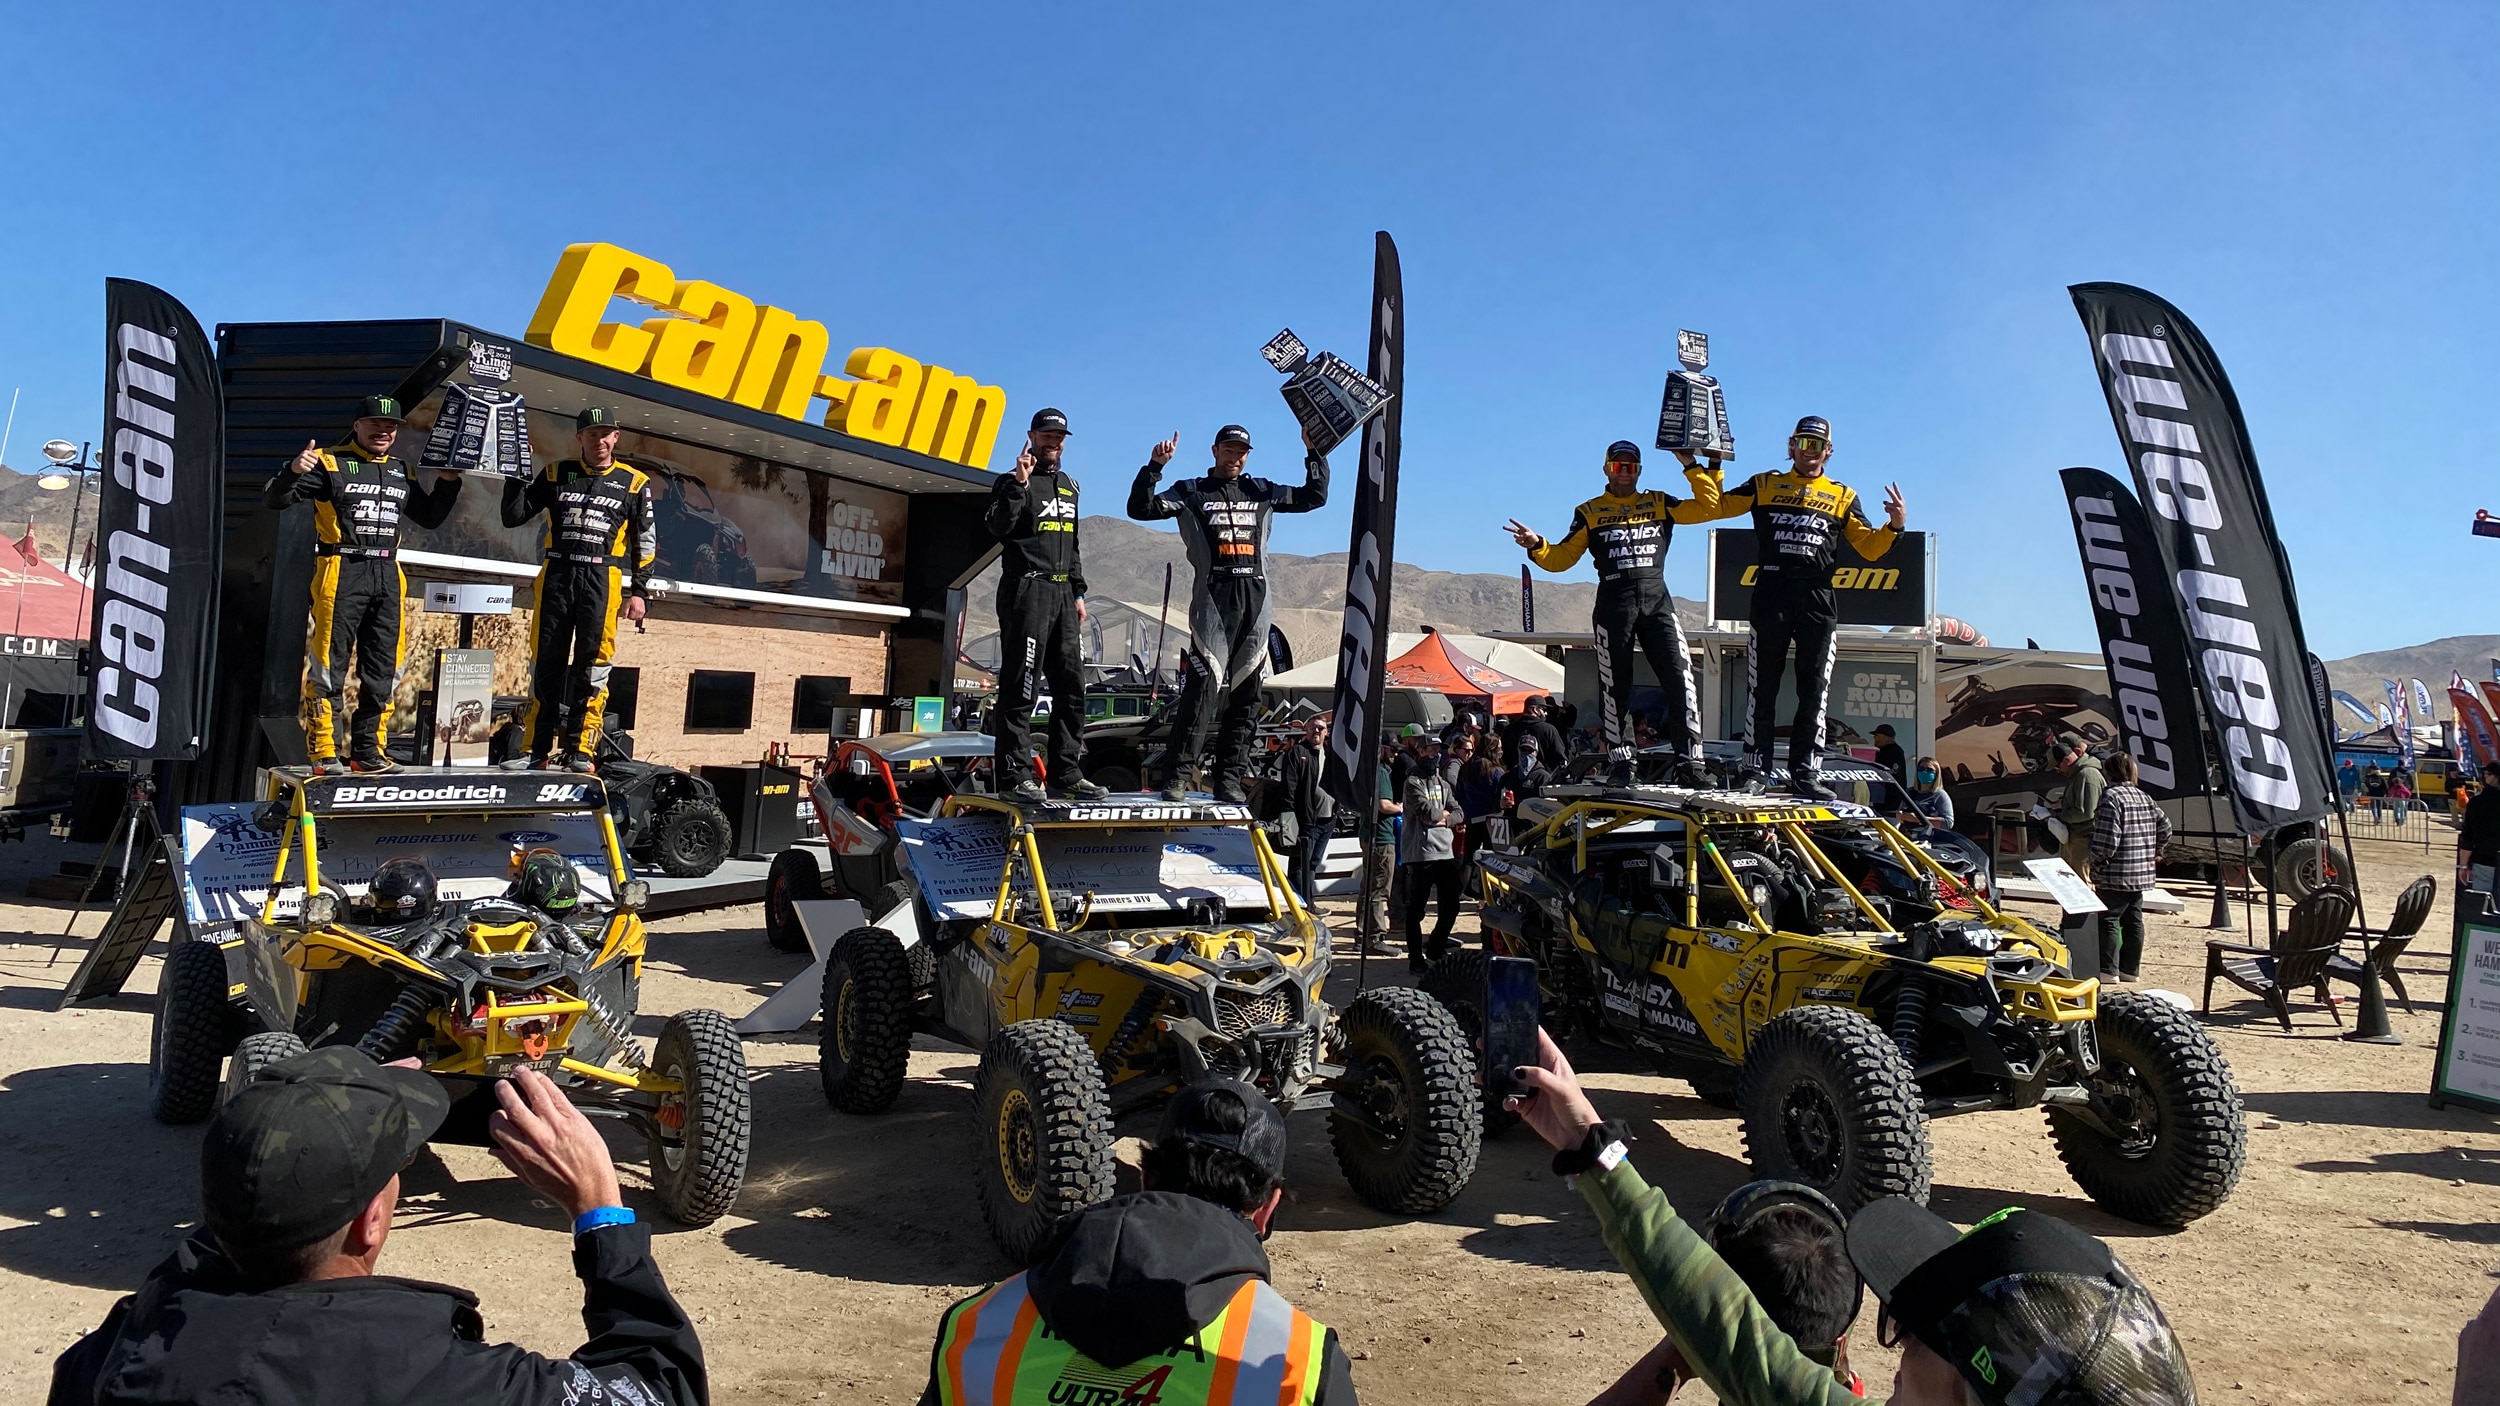 King of the hammers